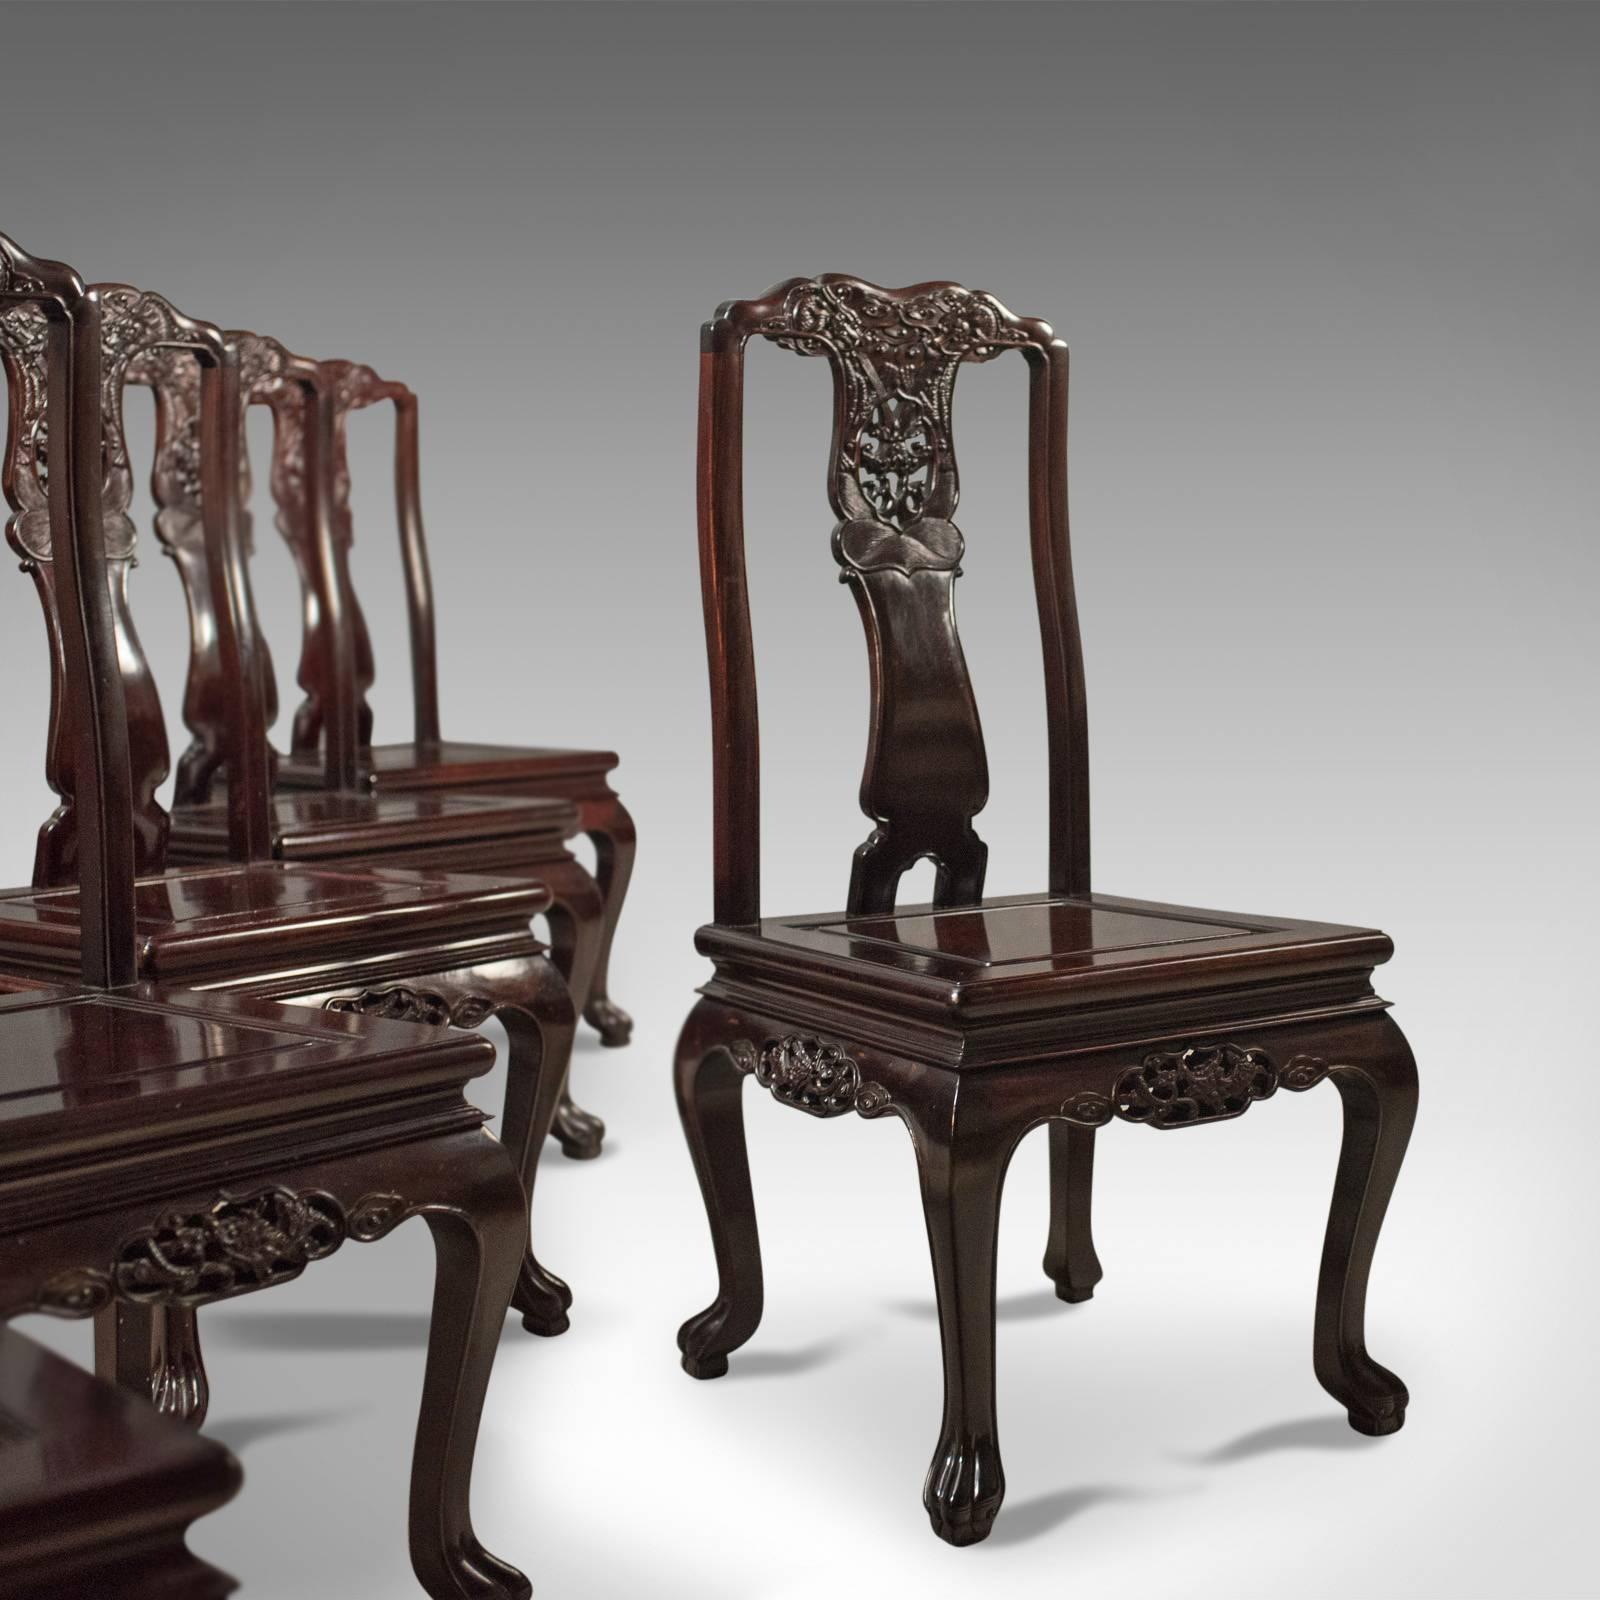 Chinoiserie Traditional Oriental Rosewood Dining Table and Set of Six Chairs, Carved Suite